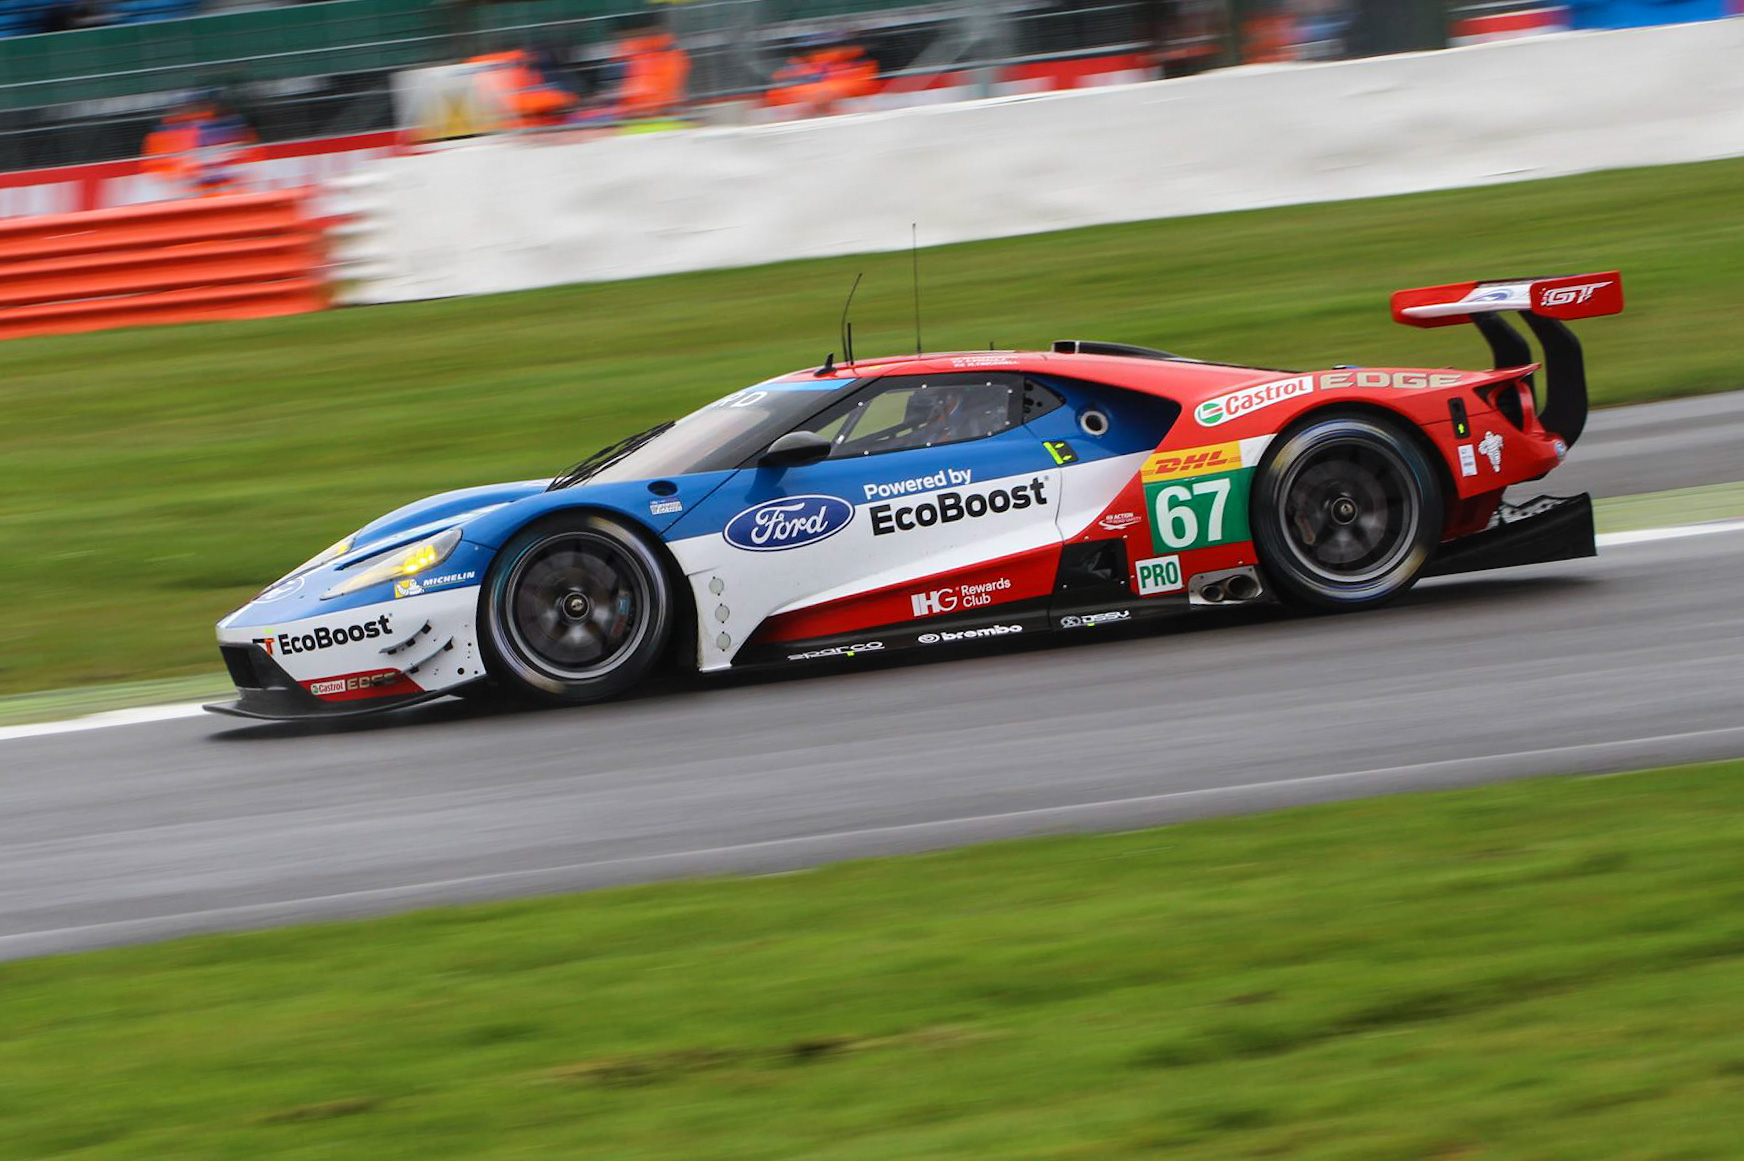 Andy Priaulx: “We’re in a good strong position”